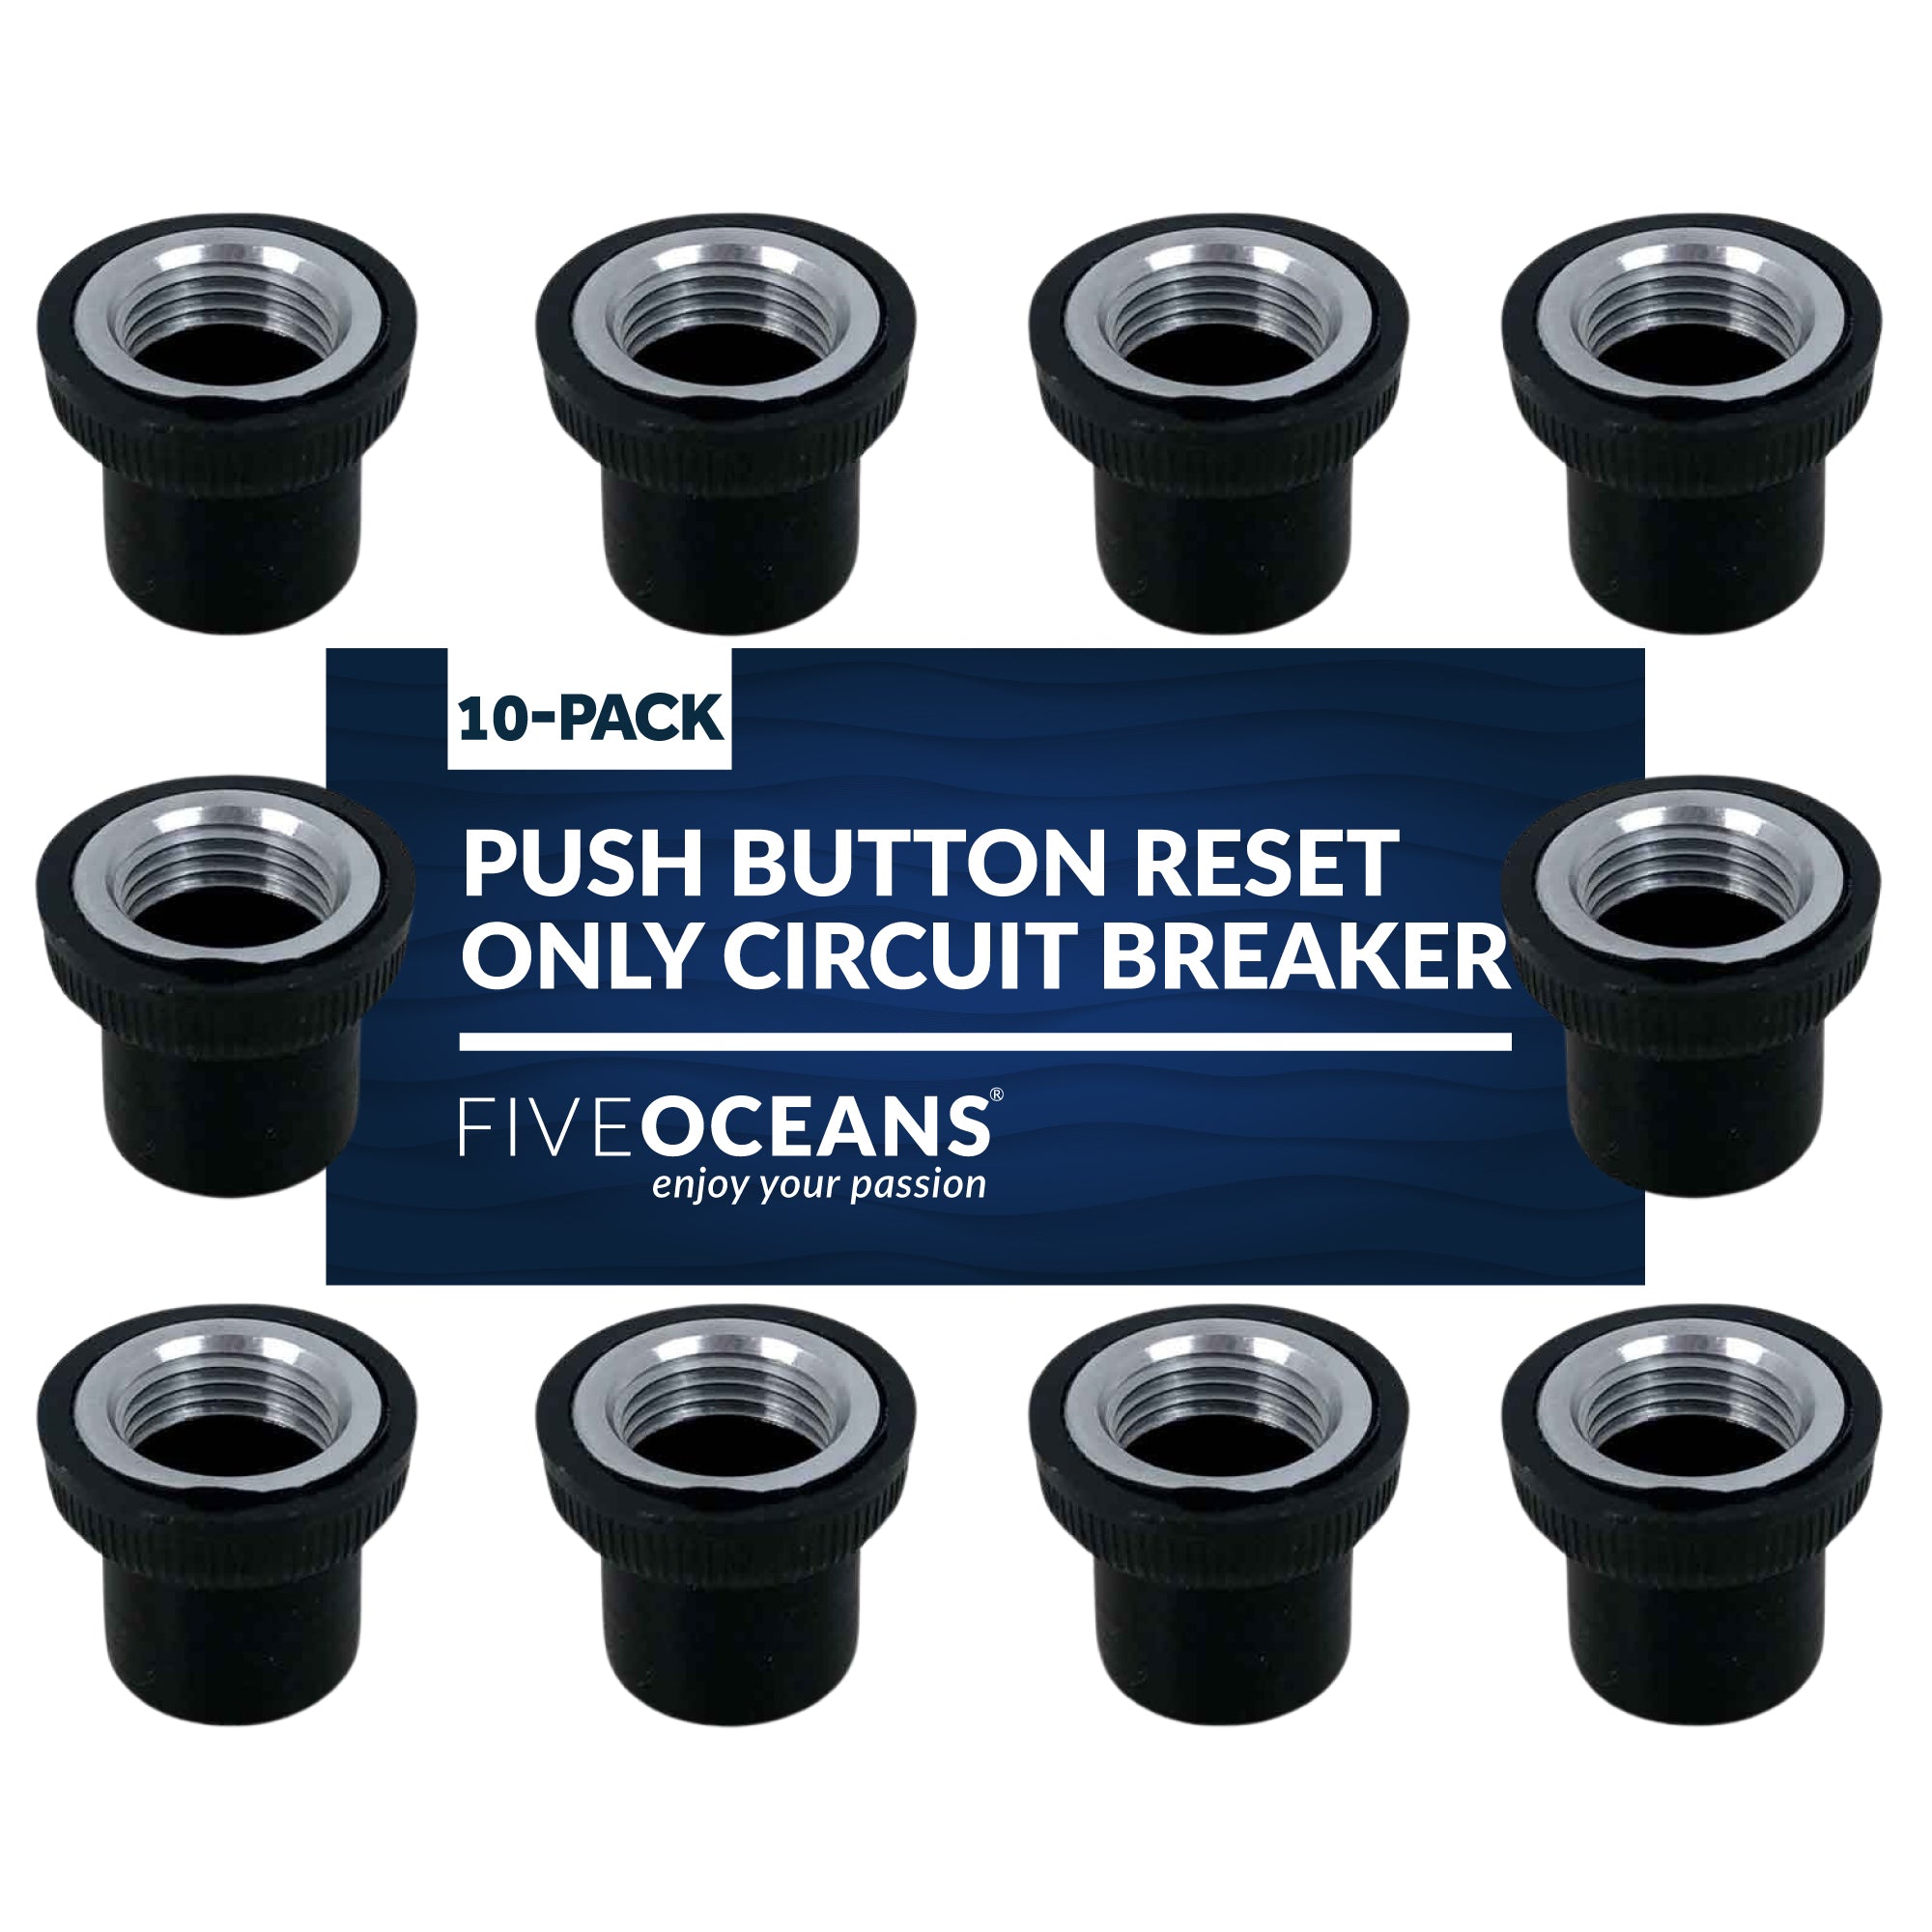 Push Button Reset Only Circuit Breaker, 10-pack - FO4436-M10